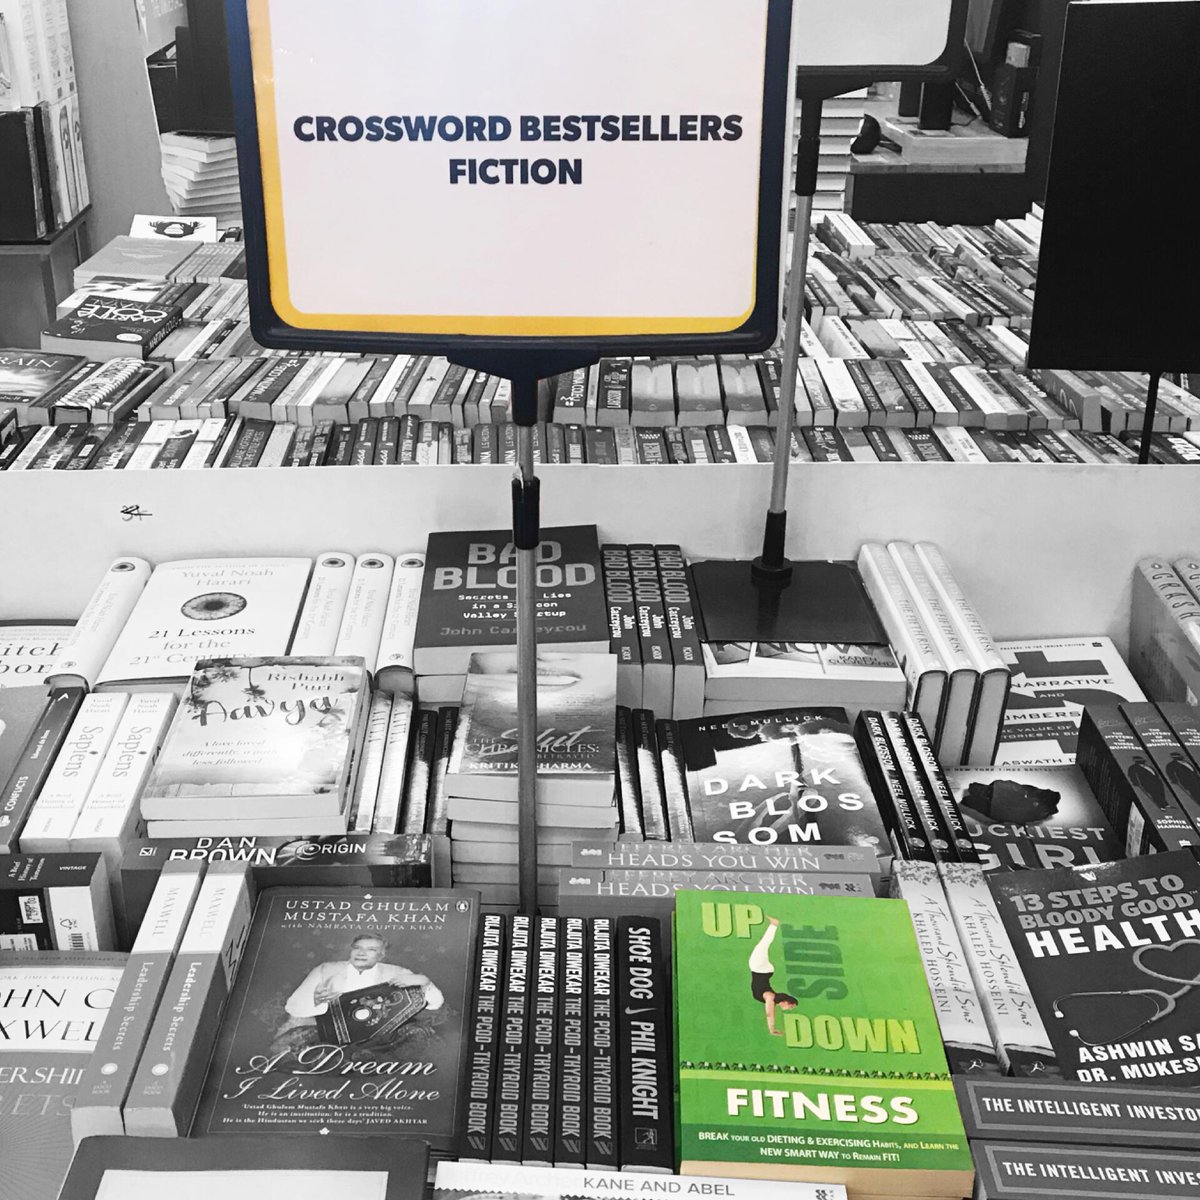 My Book #upsidedownfitnessbook has made it to the best sellers category in the #crosswordbookstore. Its a simple approach of staying slim & Fit in your daily lives. Pls have a look when you visit Crossword bookstore.

#writeplacepub #writerscommunity #fitness #slimming #Health